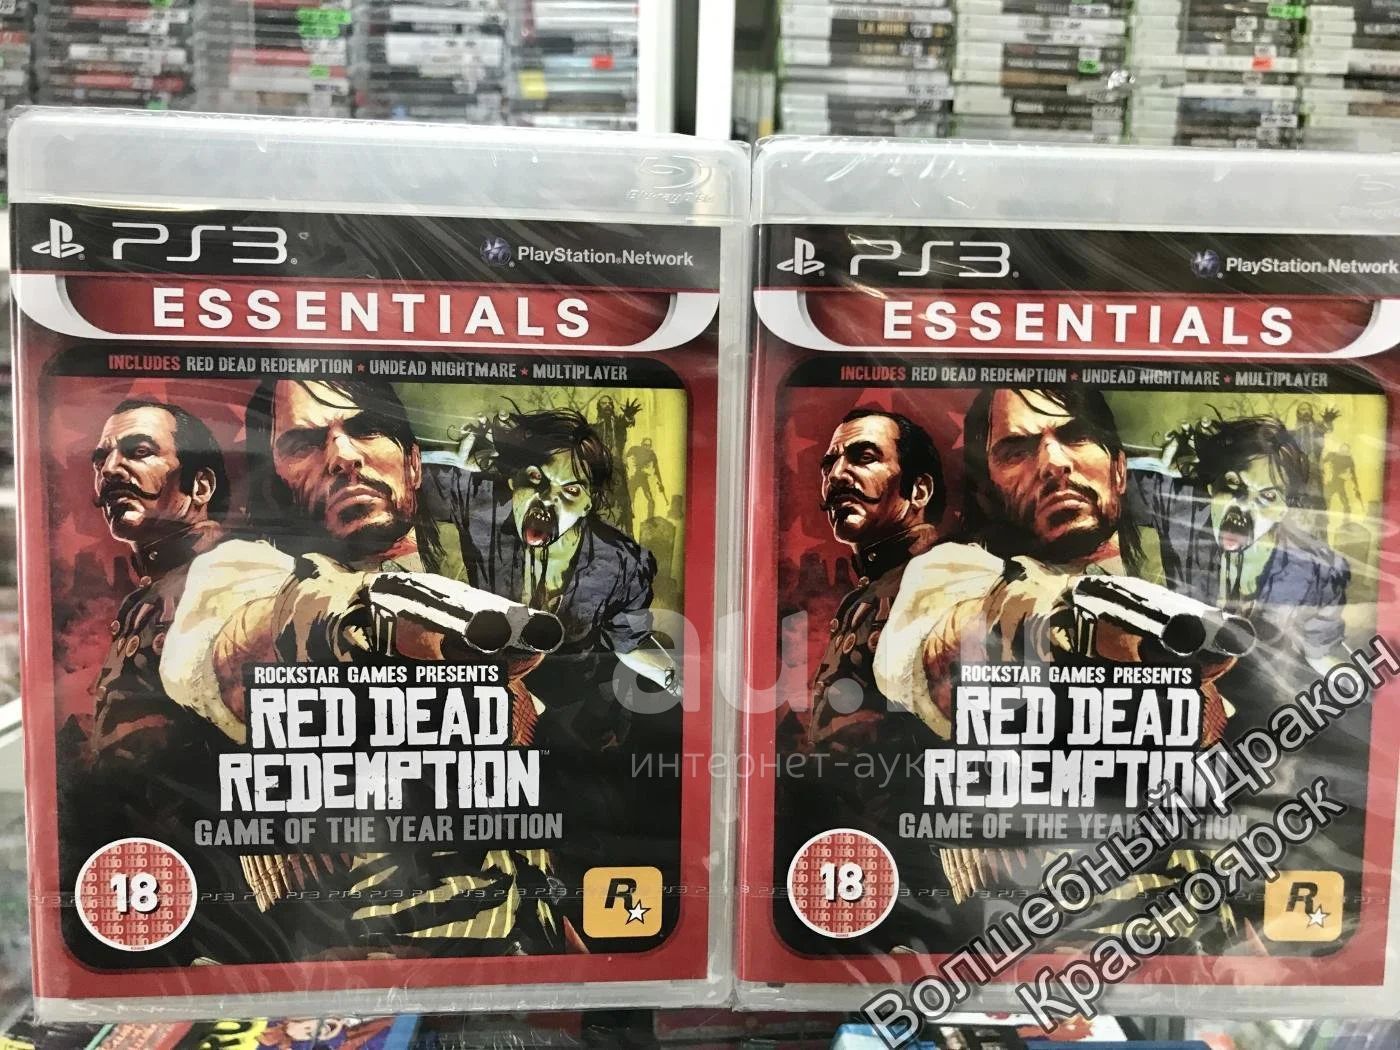 Rdr ps3. Red Dead Redemption 1 диск ps3. Red Dead Redemption 1 PLAYSTATION 3. Red Dead Redemption 2 ps3. Диск ред деад редемптион на ПС 3.